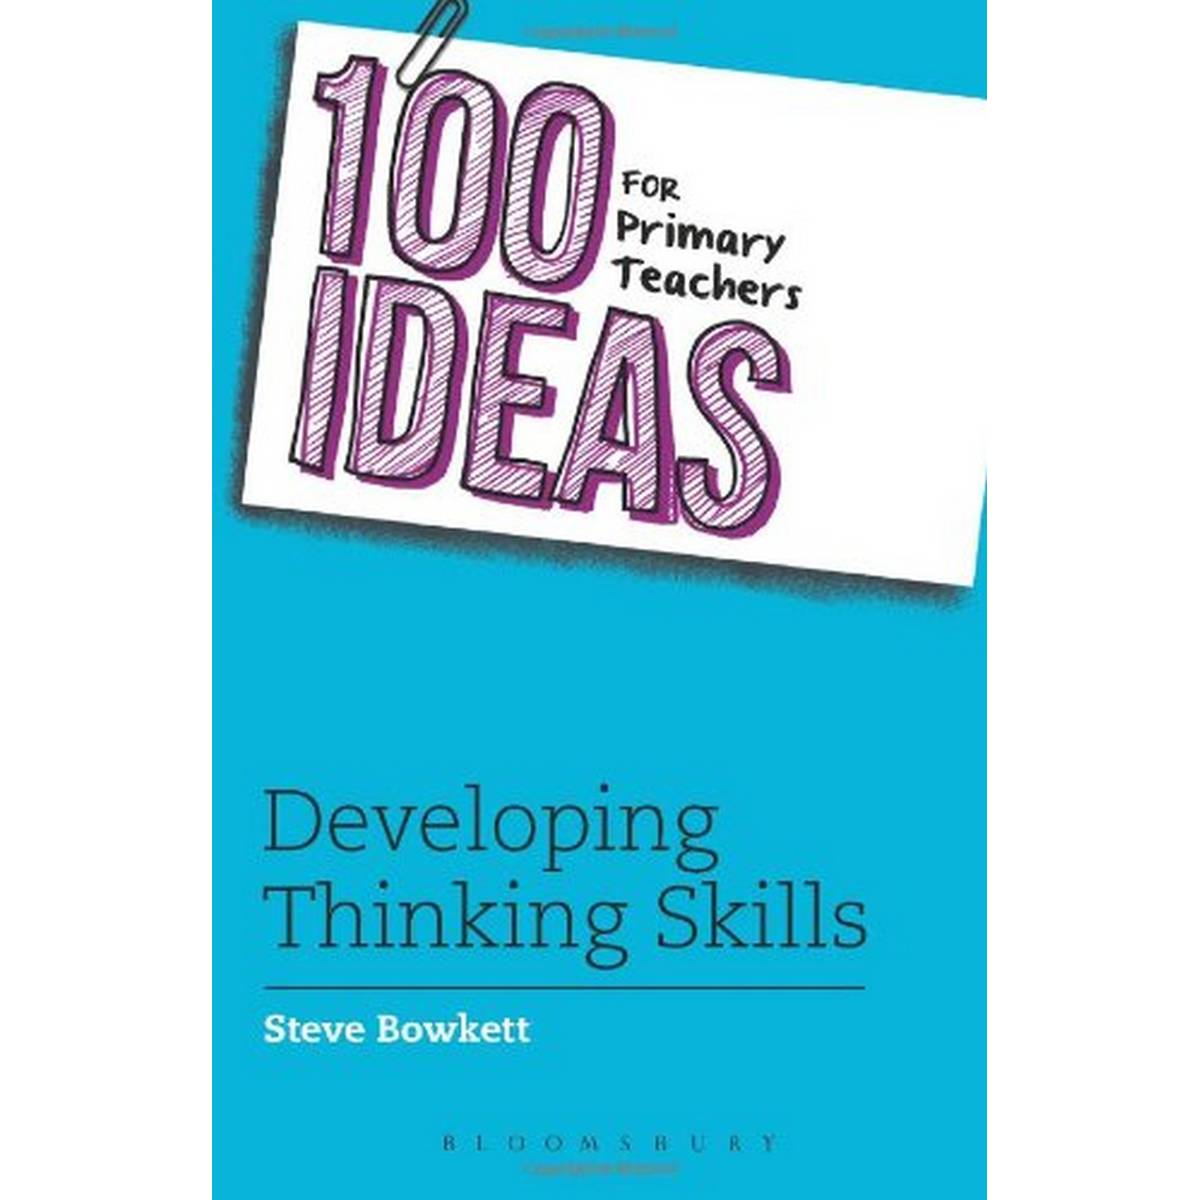 100 Ideas for Primary Teachers: Developing Thinking Skills